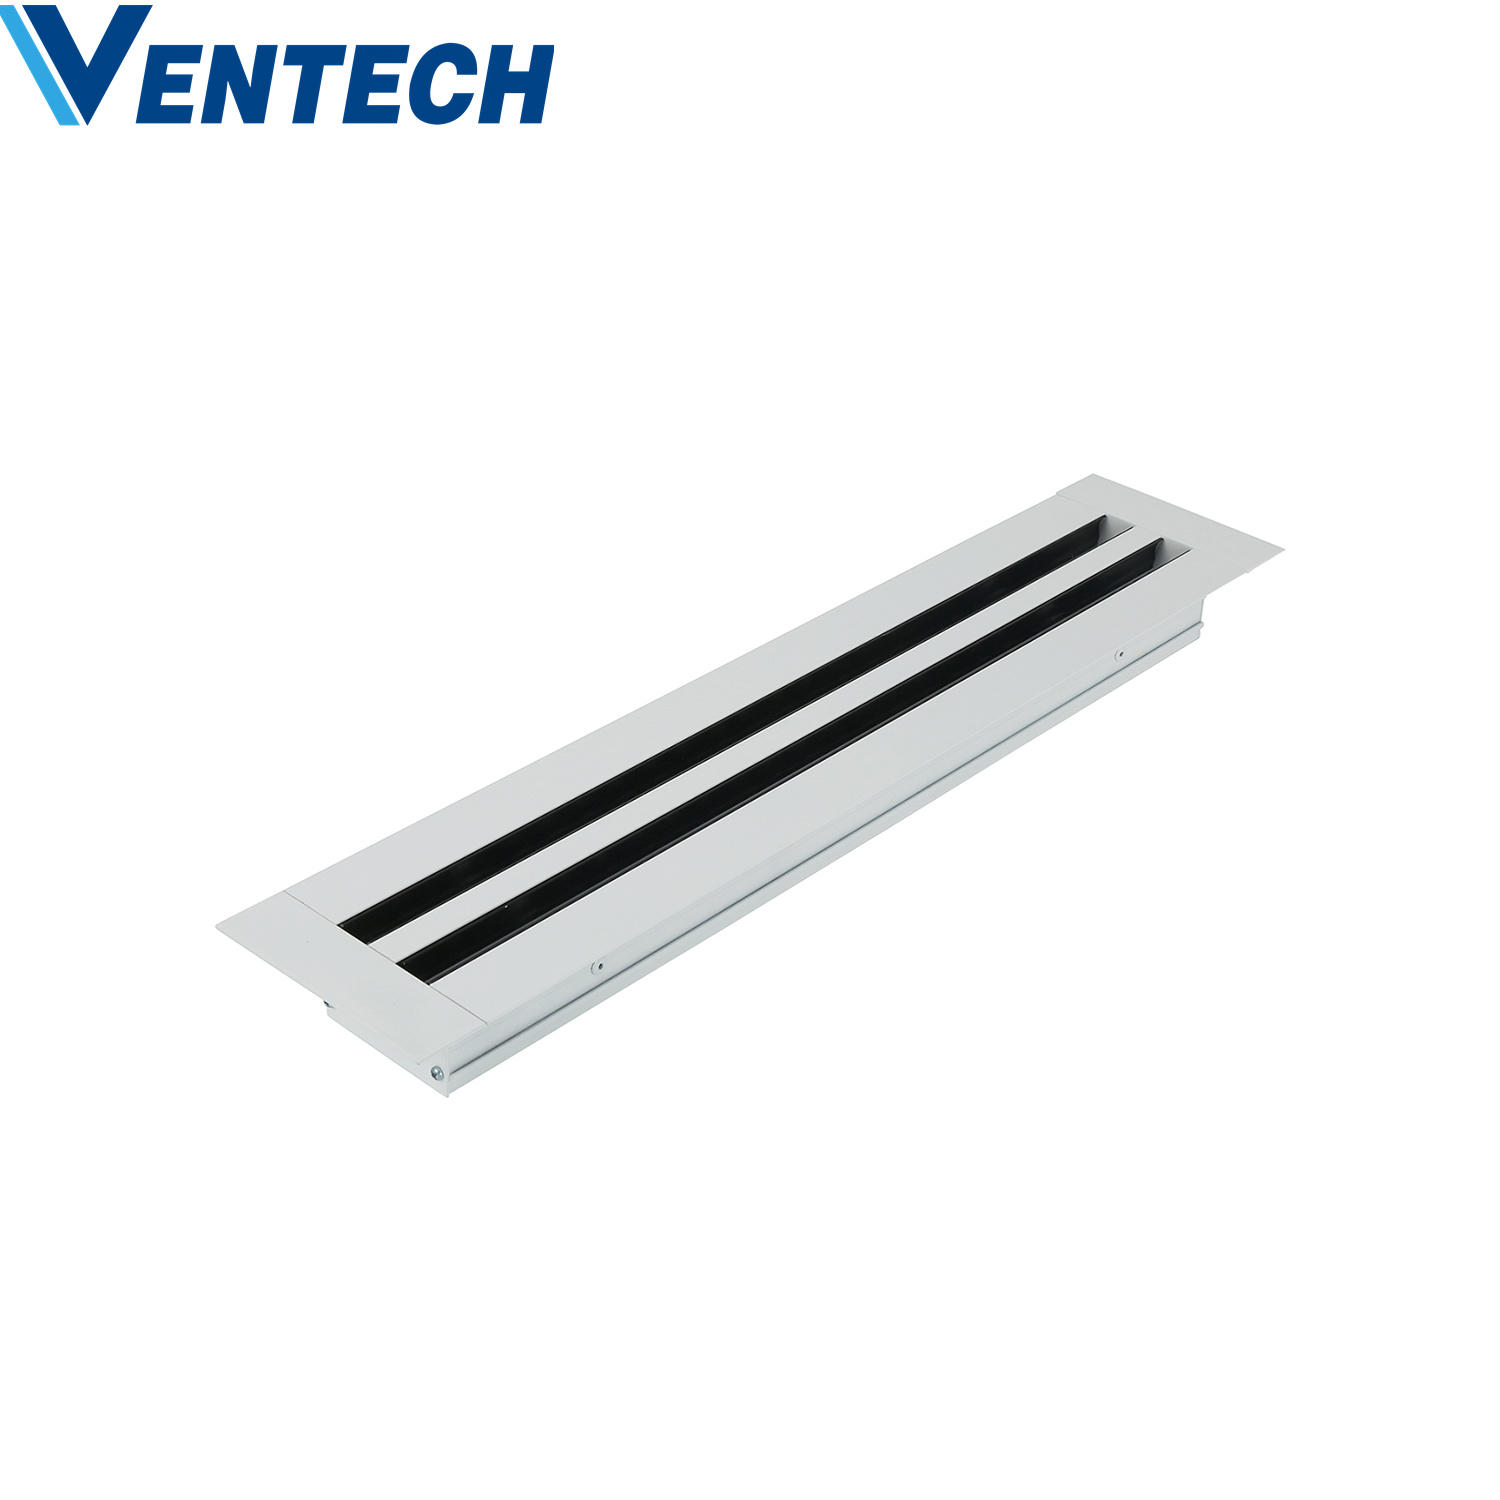 Hvac Aluminum Exhaust Air Ventilation Ceiling Duct Conditioning Diffuser Supply Linear Slot VAV Diffusers Price With Plenum Box